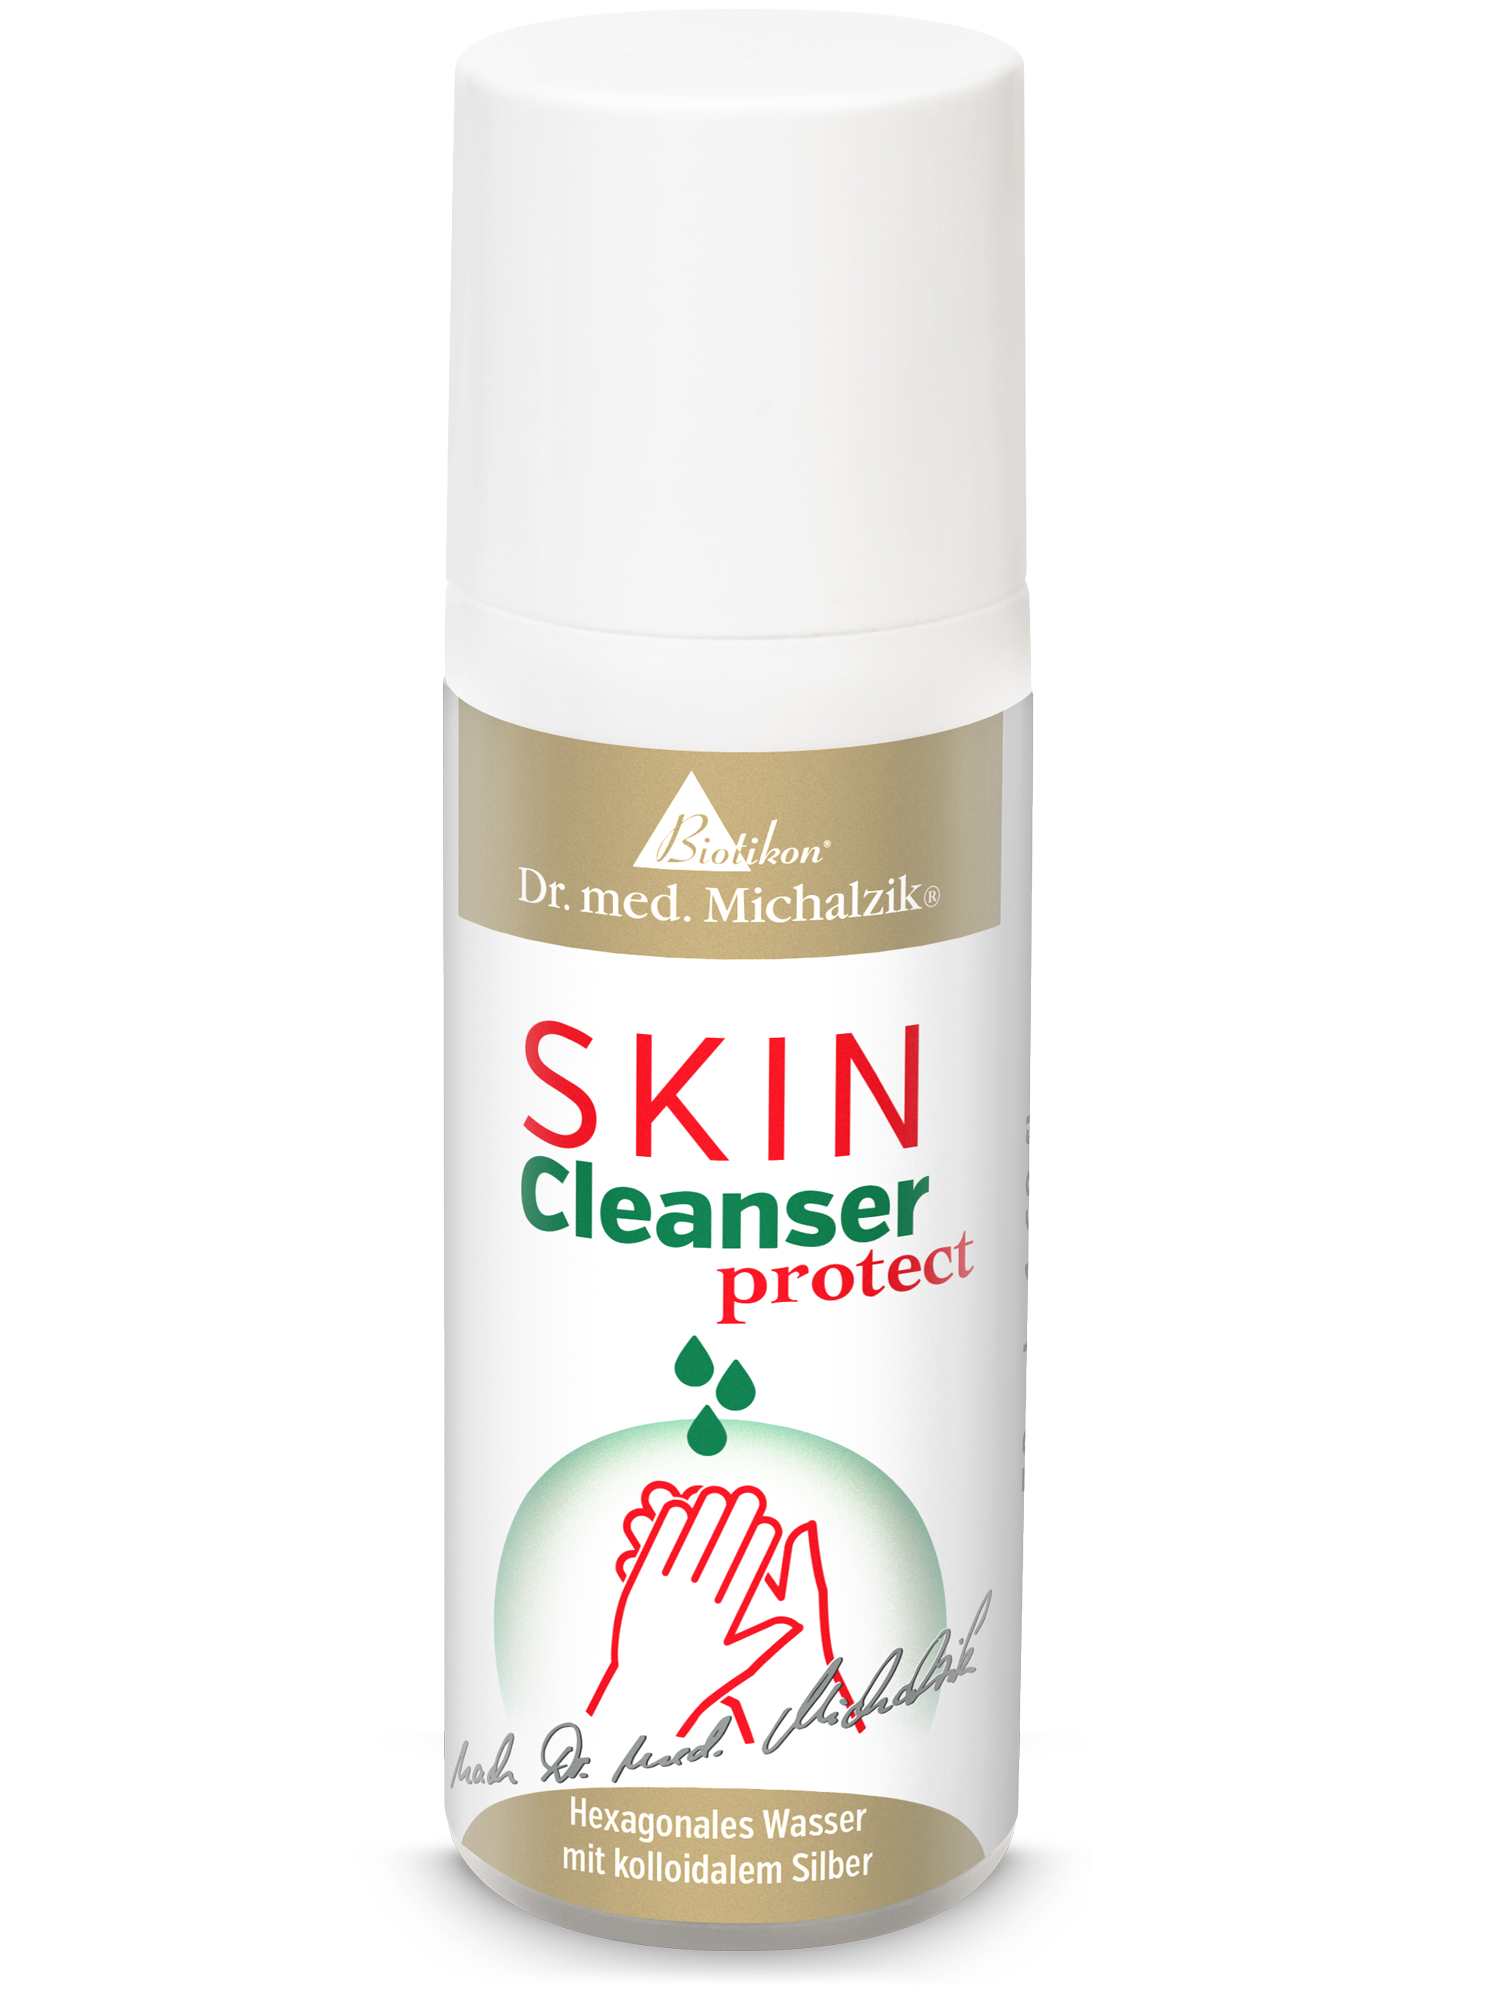 Skin Cleanser protect